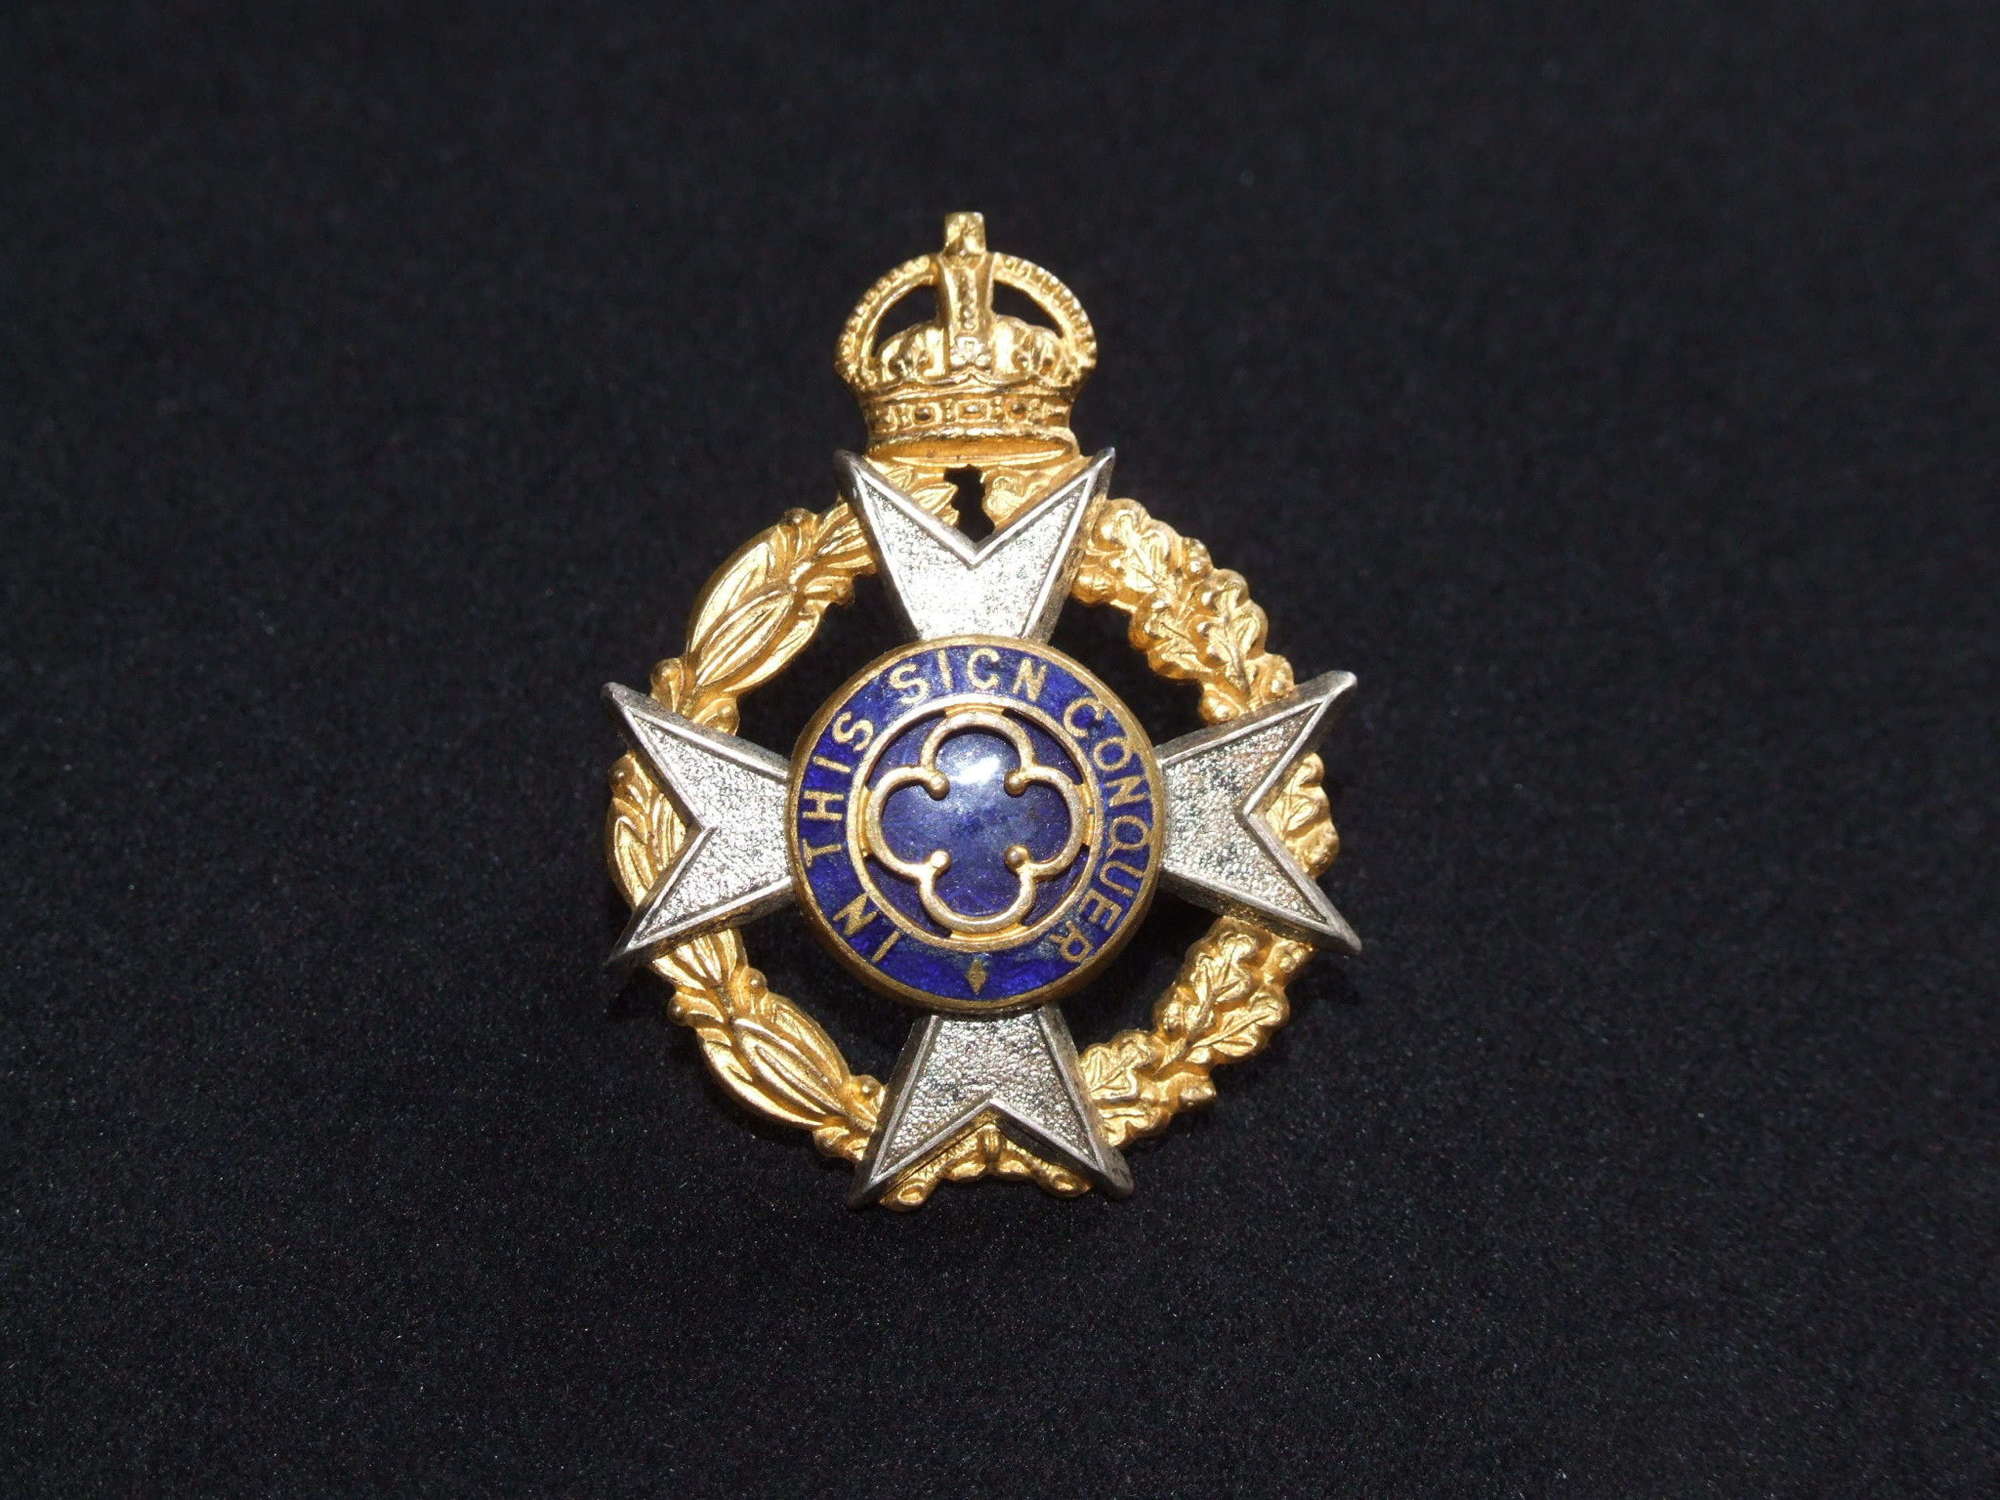 Army Chaplain's King's Crown Cap Badge by Gaunt